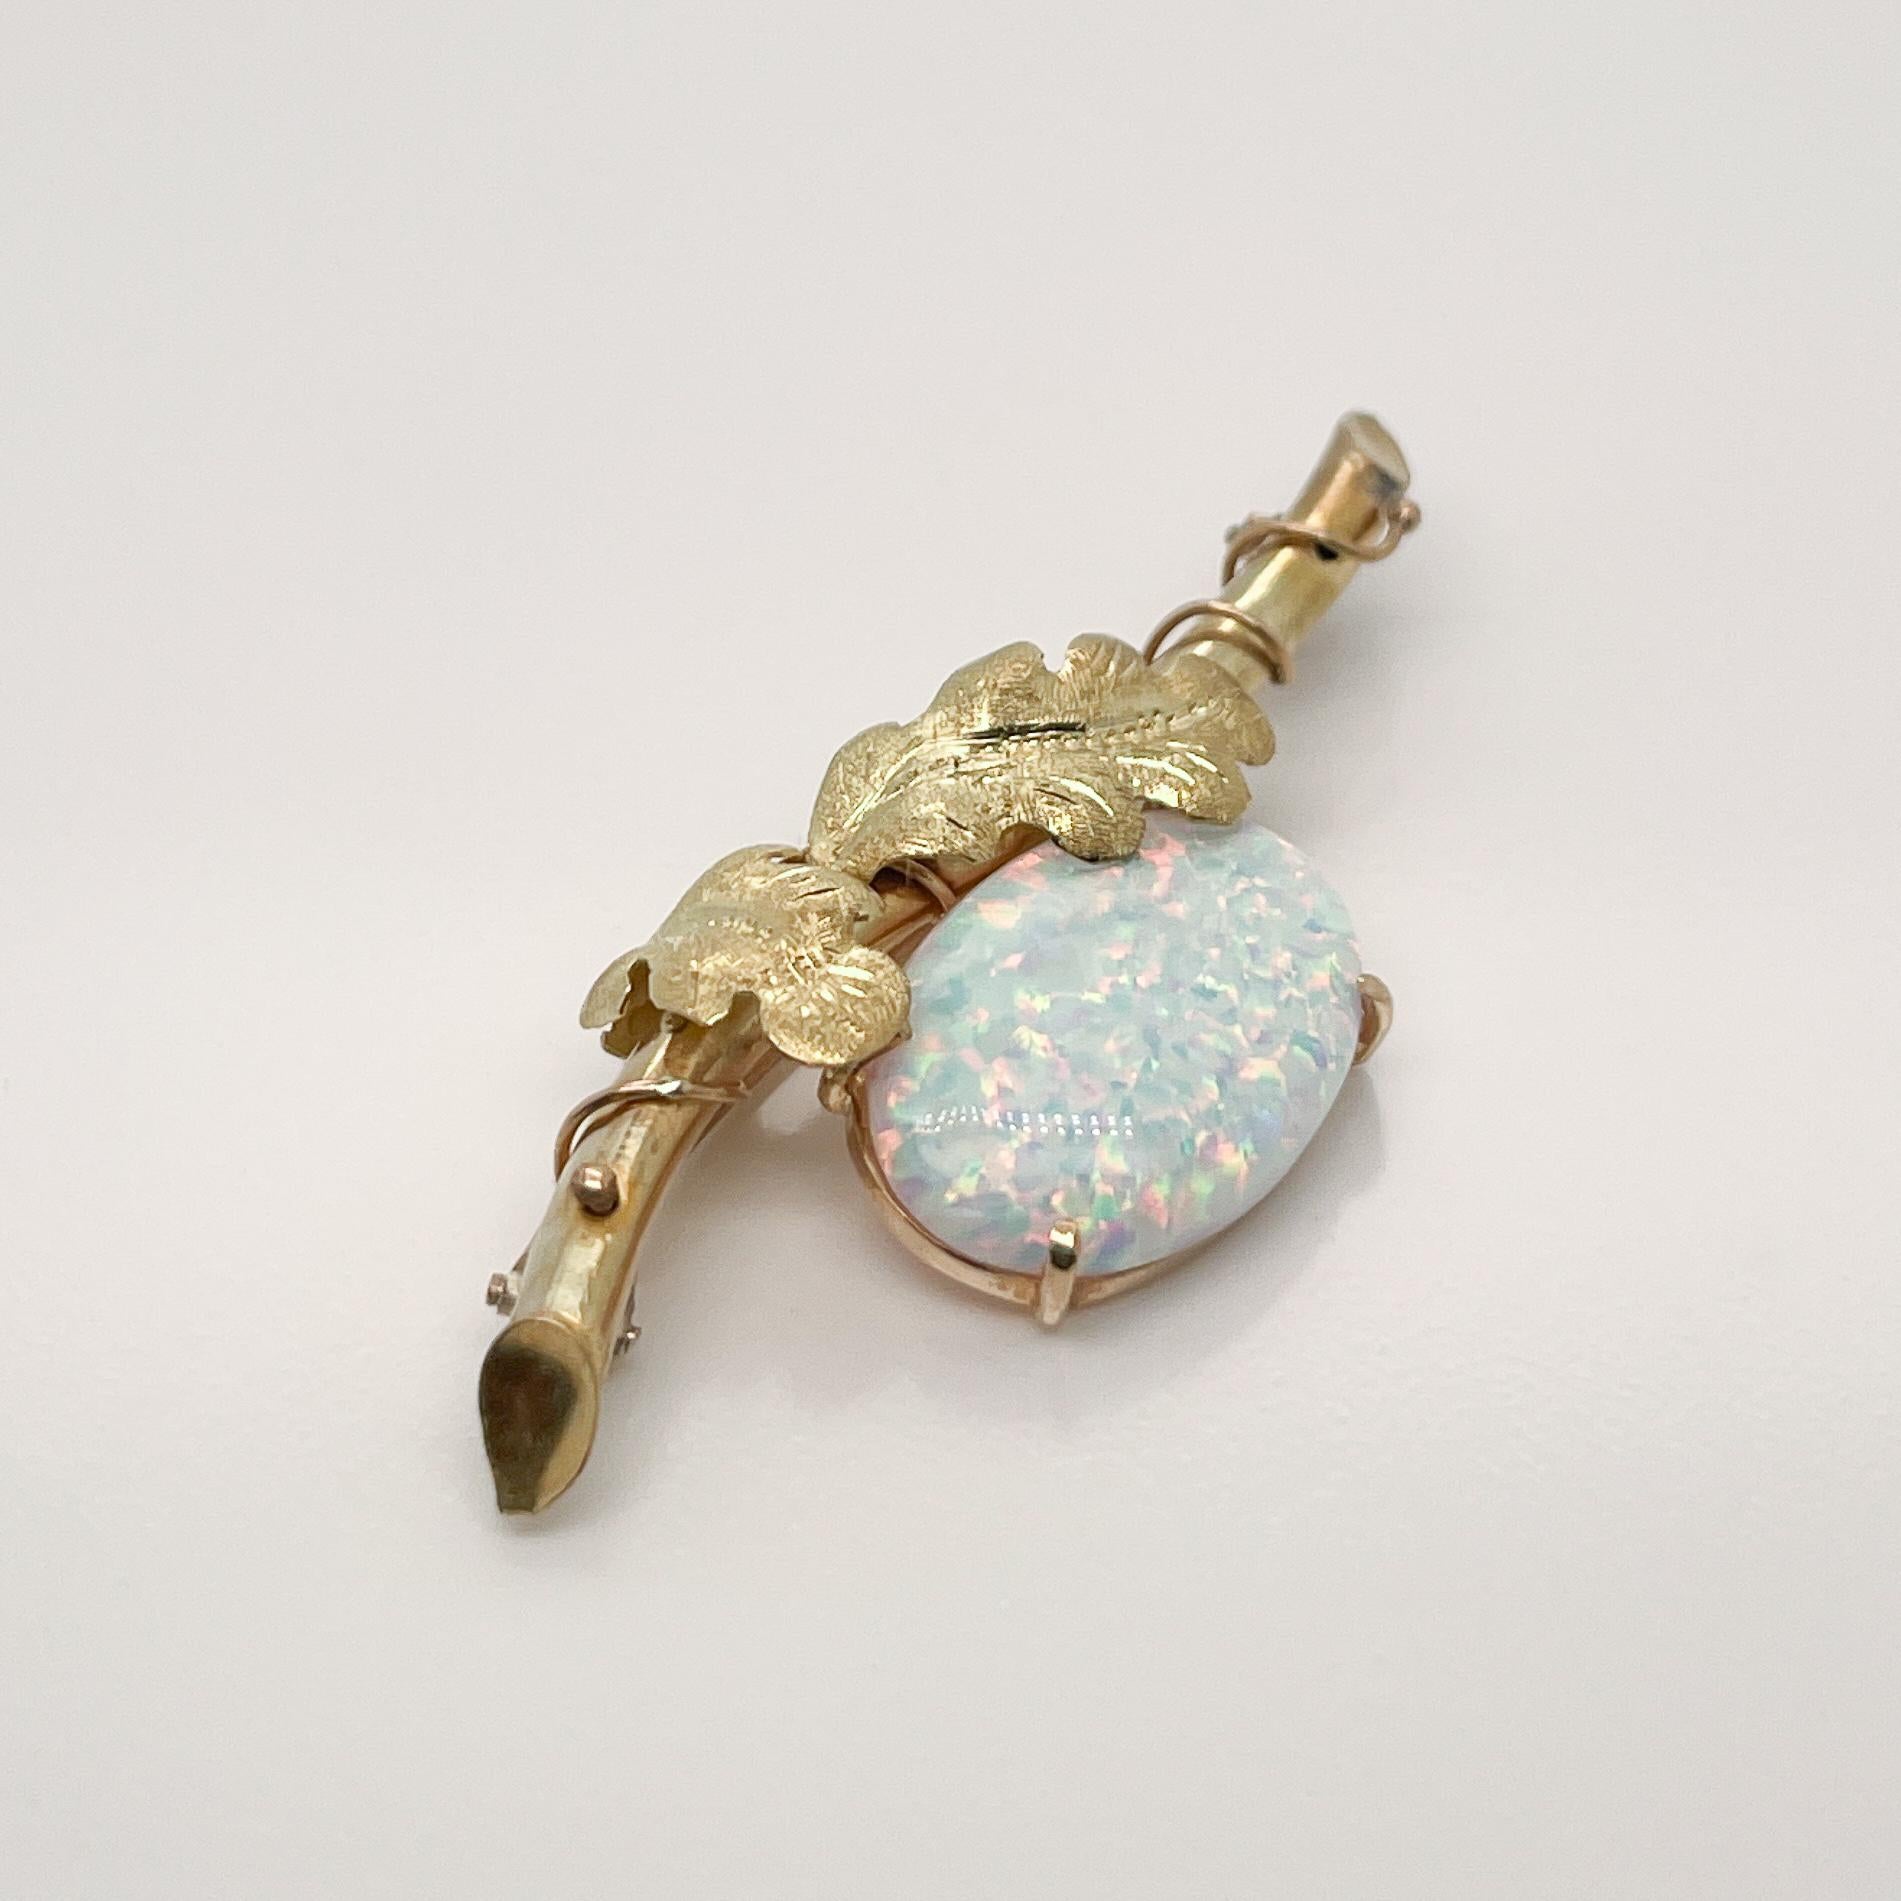 Edwardian Style 18 Karat Gold Brooch or Pin with a Opal Cabochon In Good Condition For Sale In Philadelphia, PA